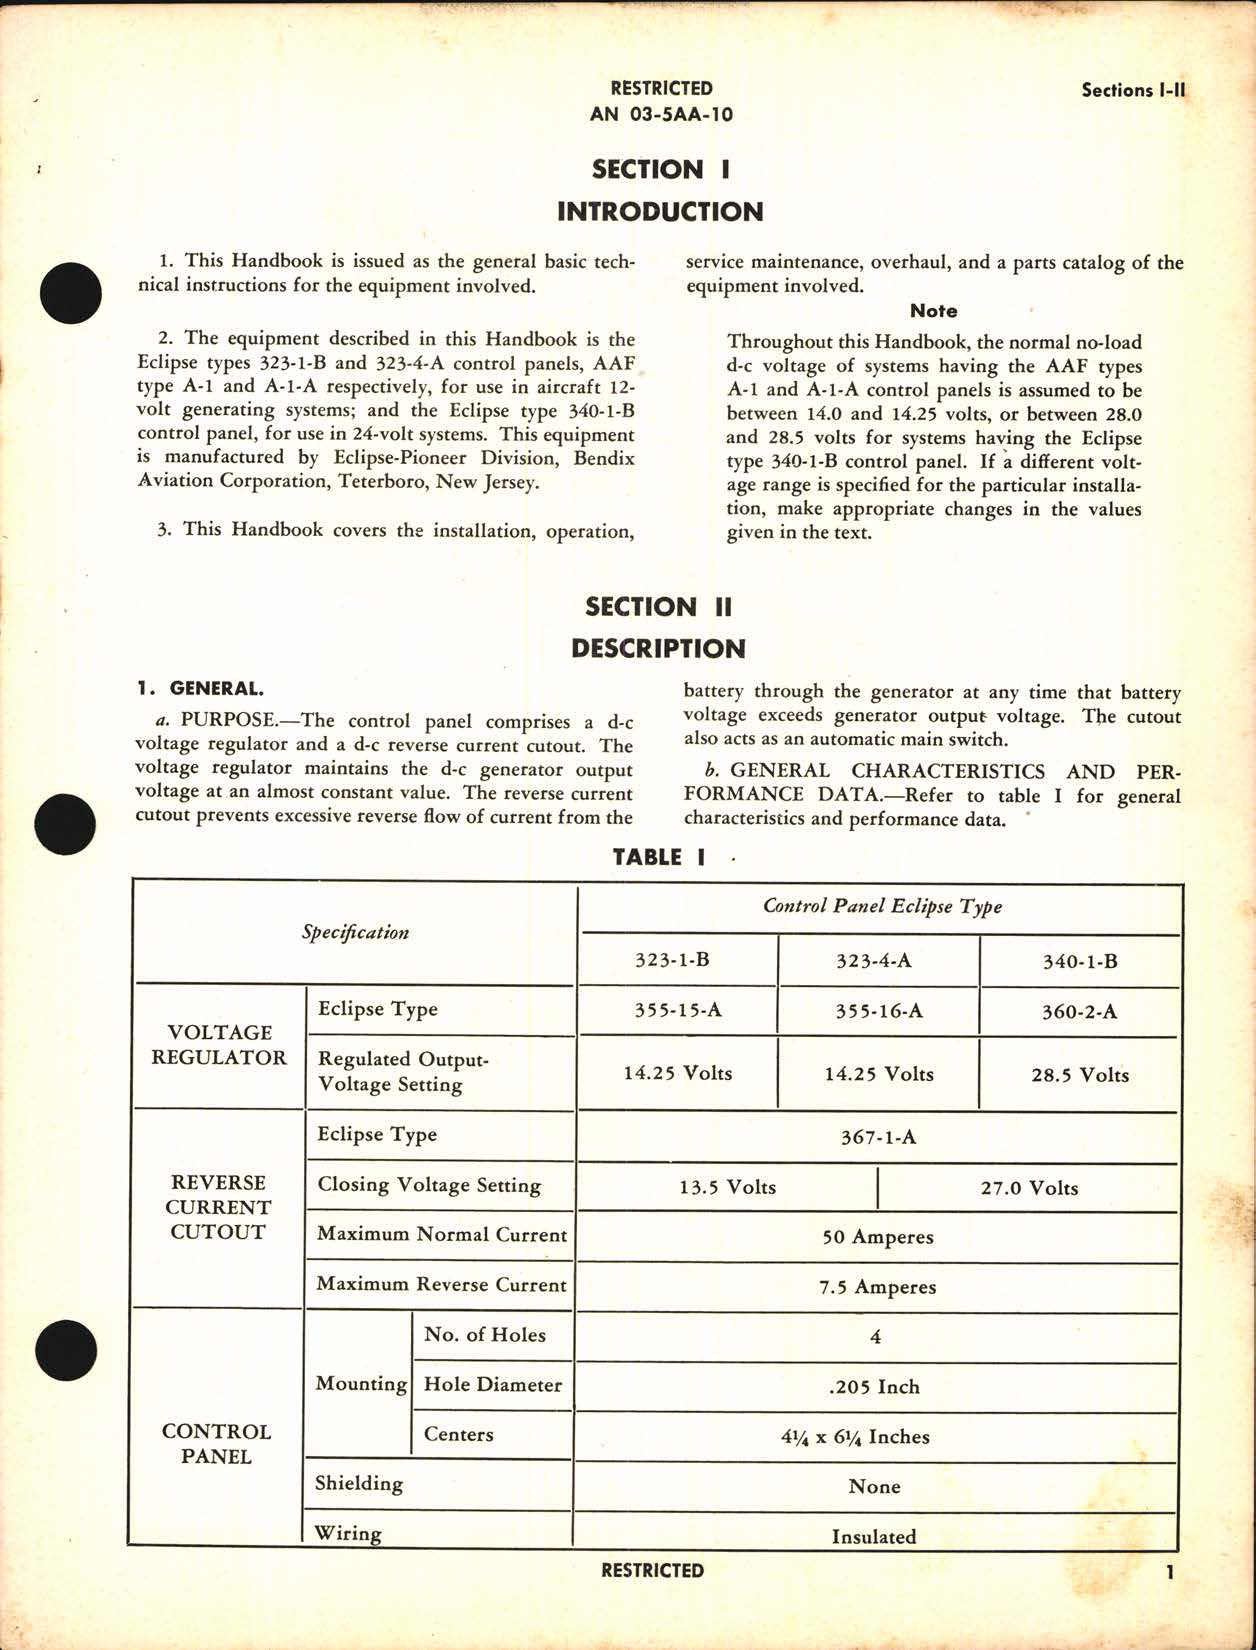 Sample page 5 from AirCorps Library document: Handbook of Instructions with Parts Catalog for Types 323 and 340 D-C Generator Control Panels